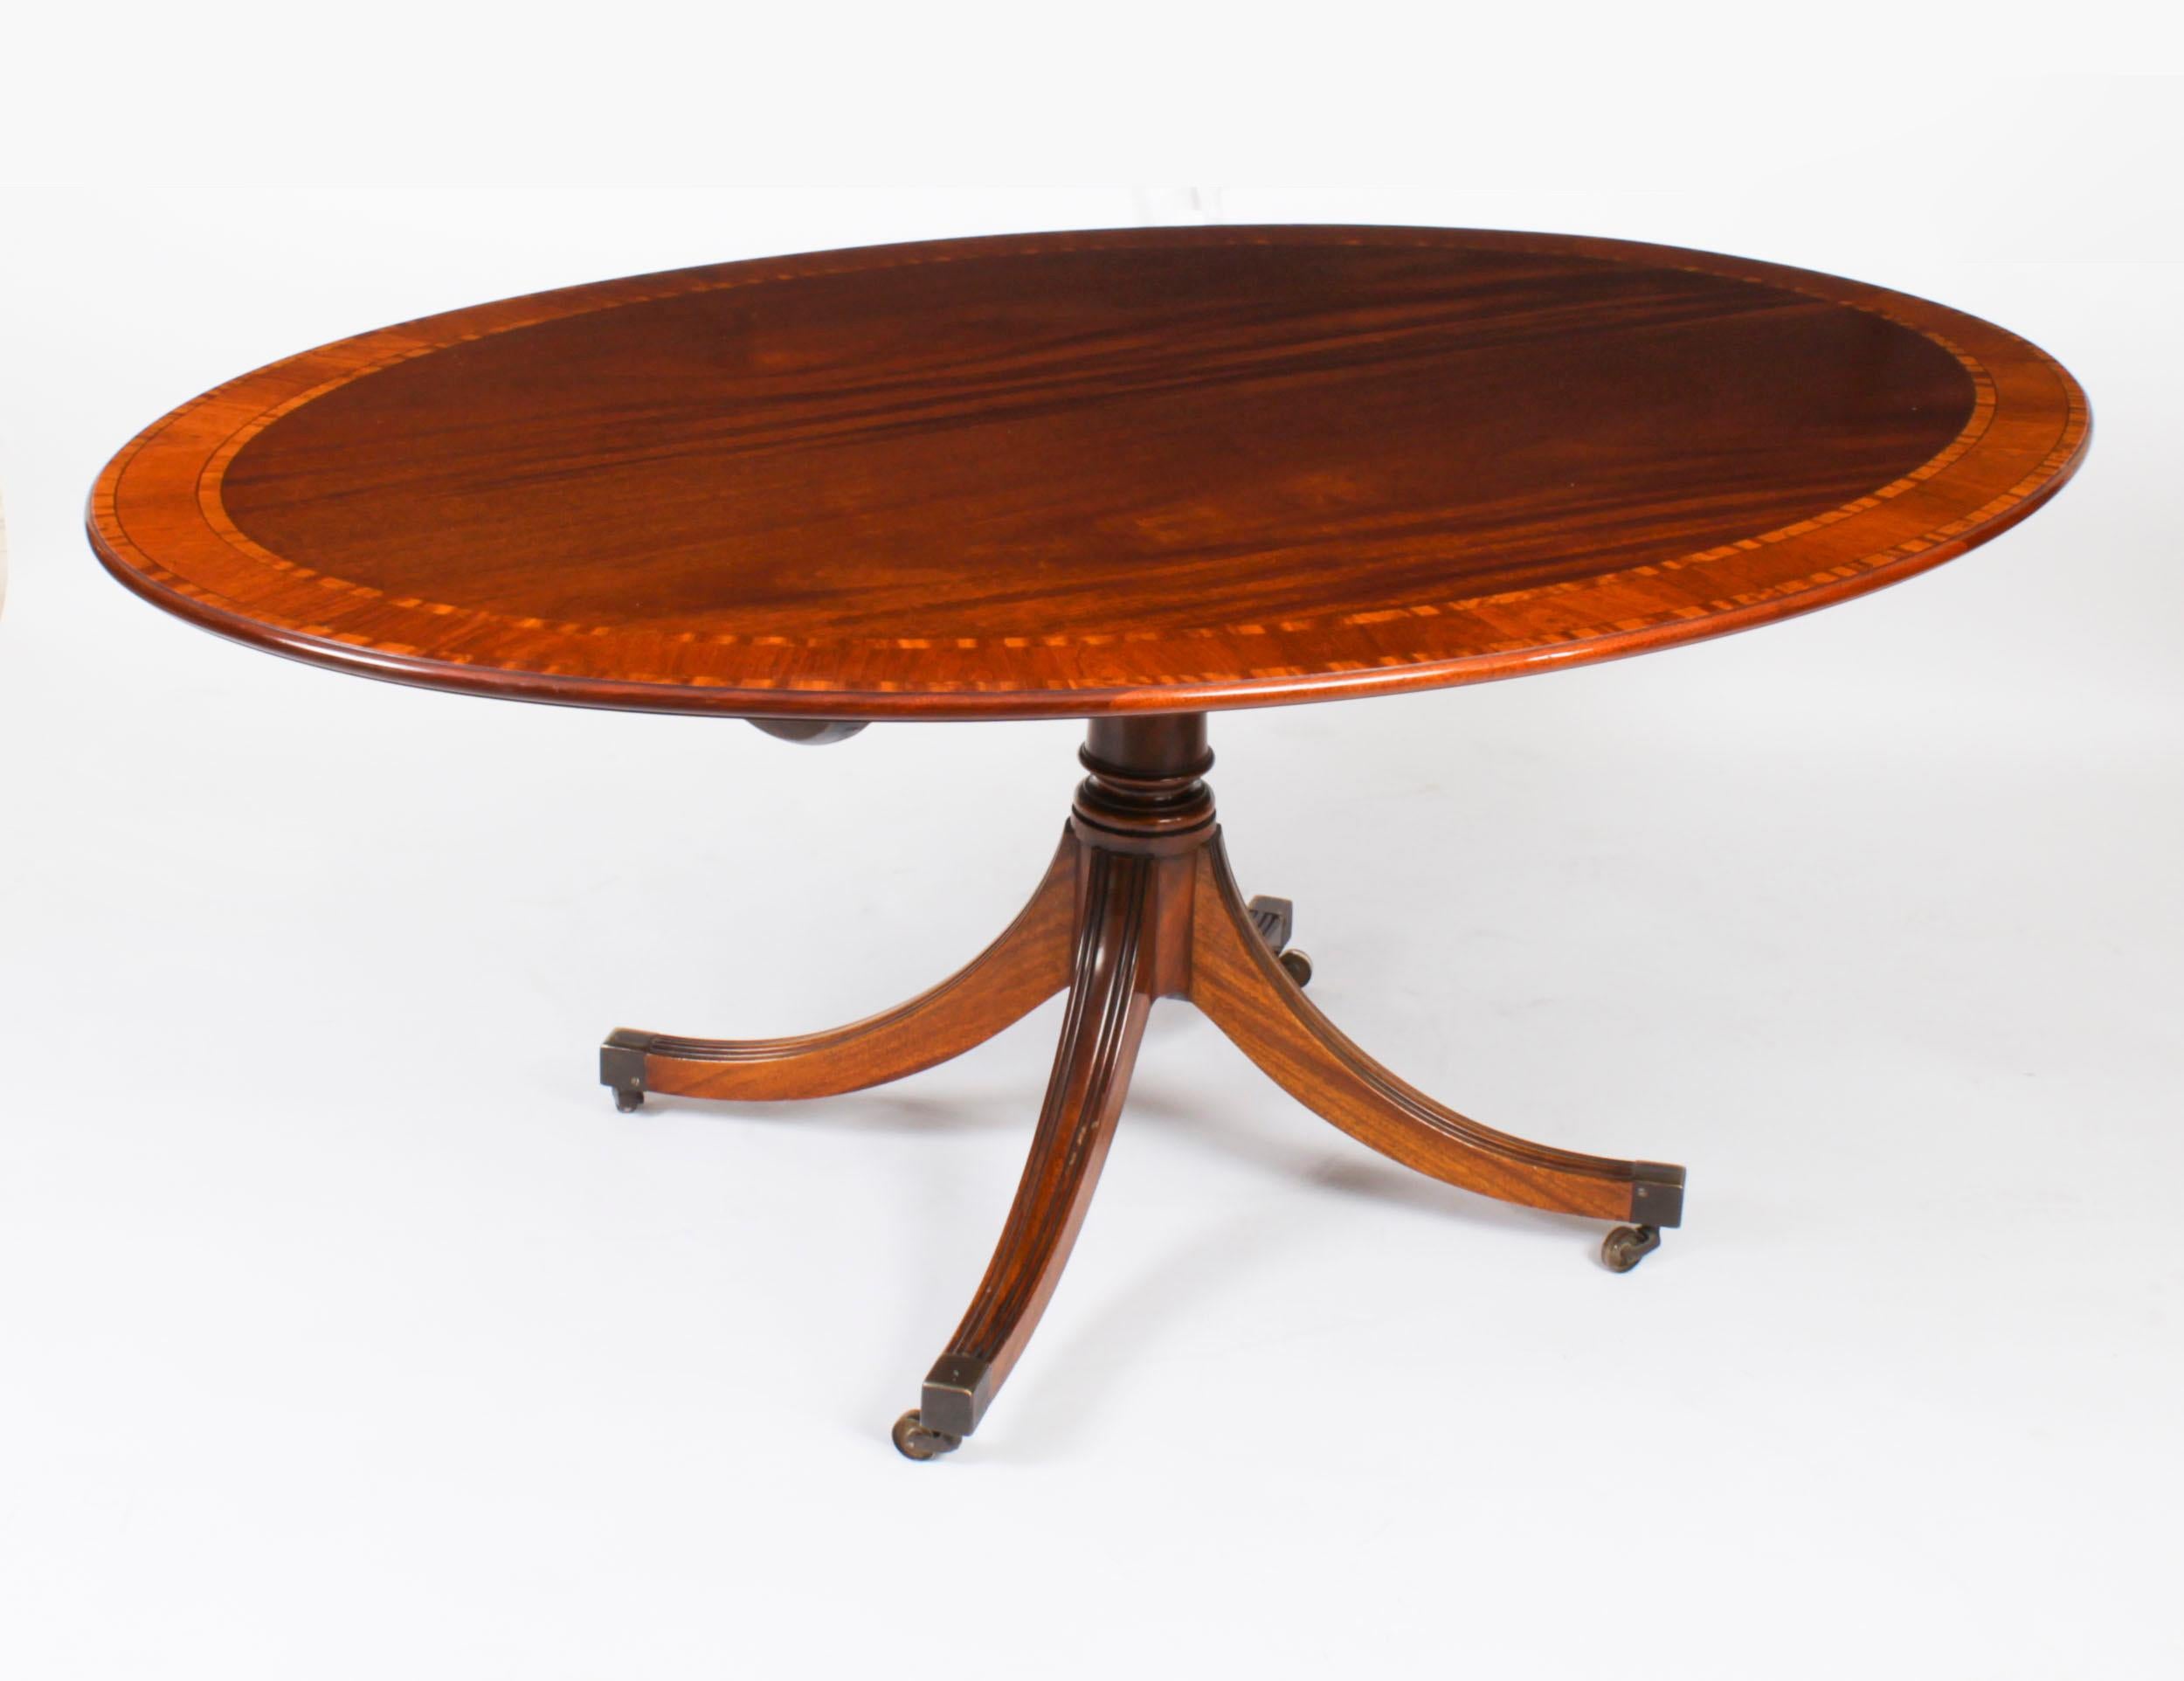 This is a beautiful Regency Revival flame mahogany and satinwood banded oval dining table together with a set of Hepplewhite dining chairs, dating from Circa 1980 and  made by the Master Cabinet maker William Tillman and bearing his label on the